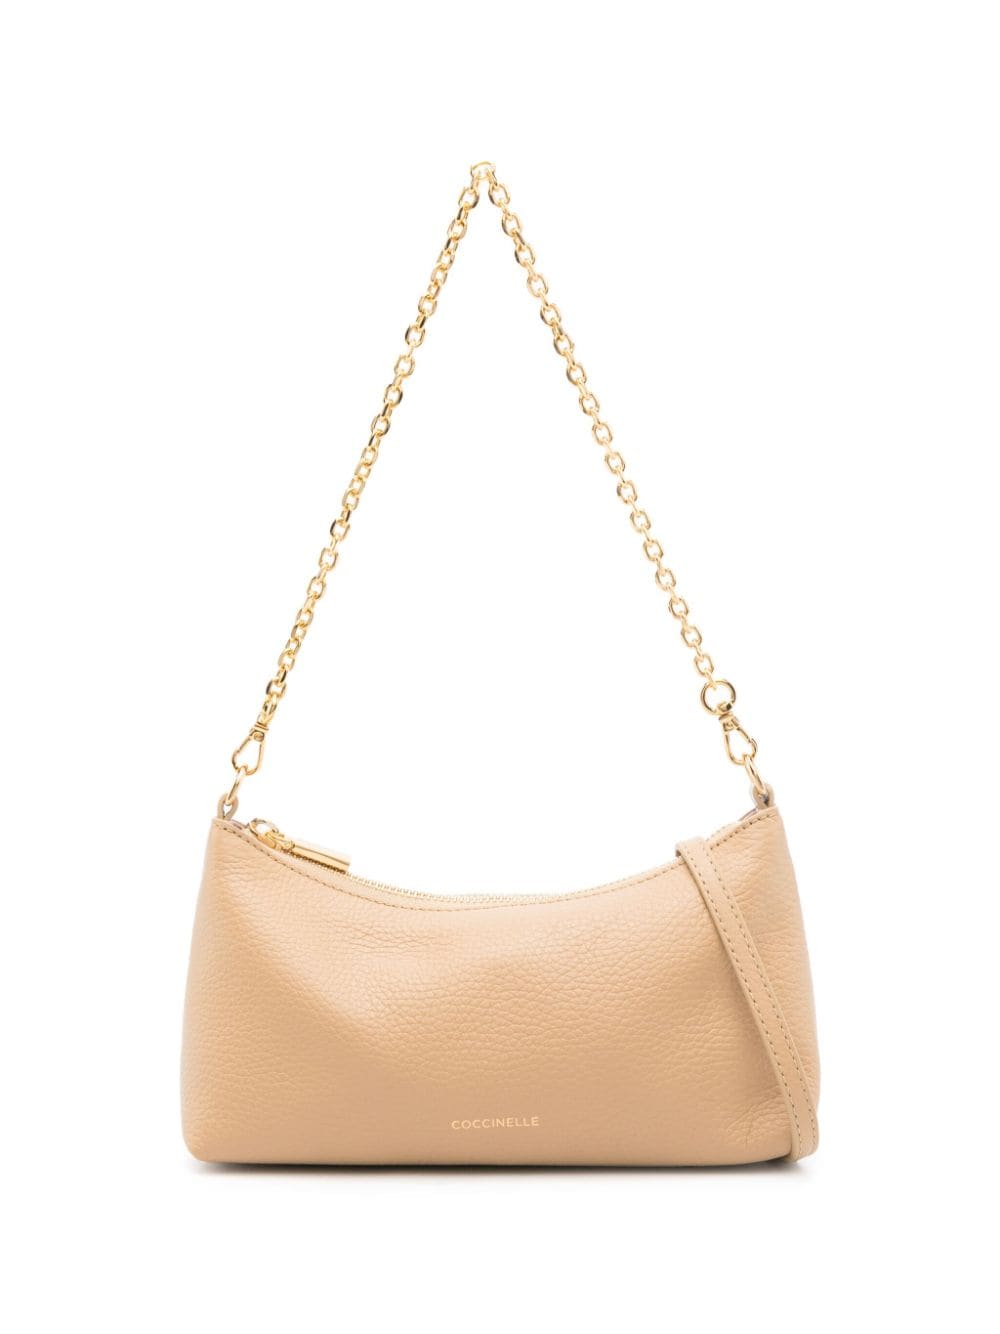 Coccinelle Grained Leather Shoulder Bag In Neutrals